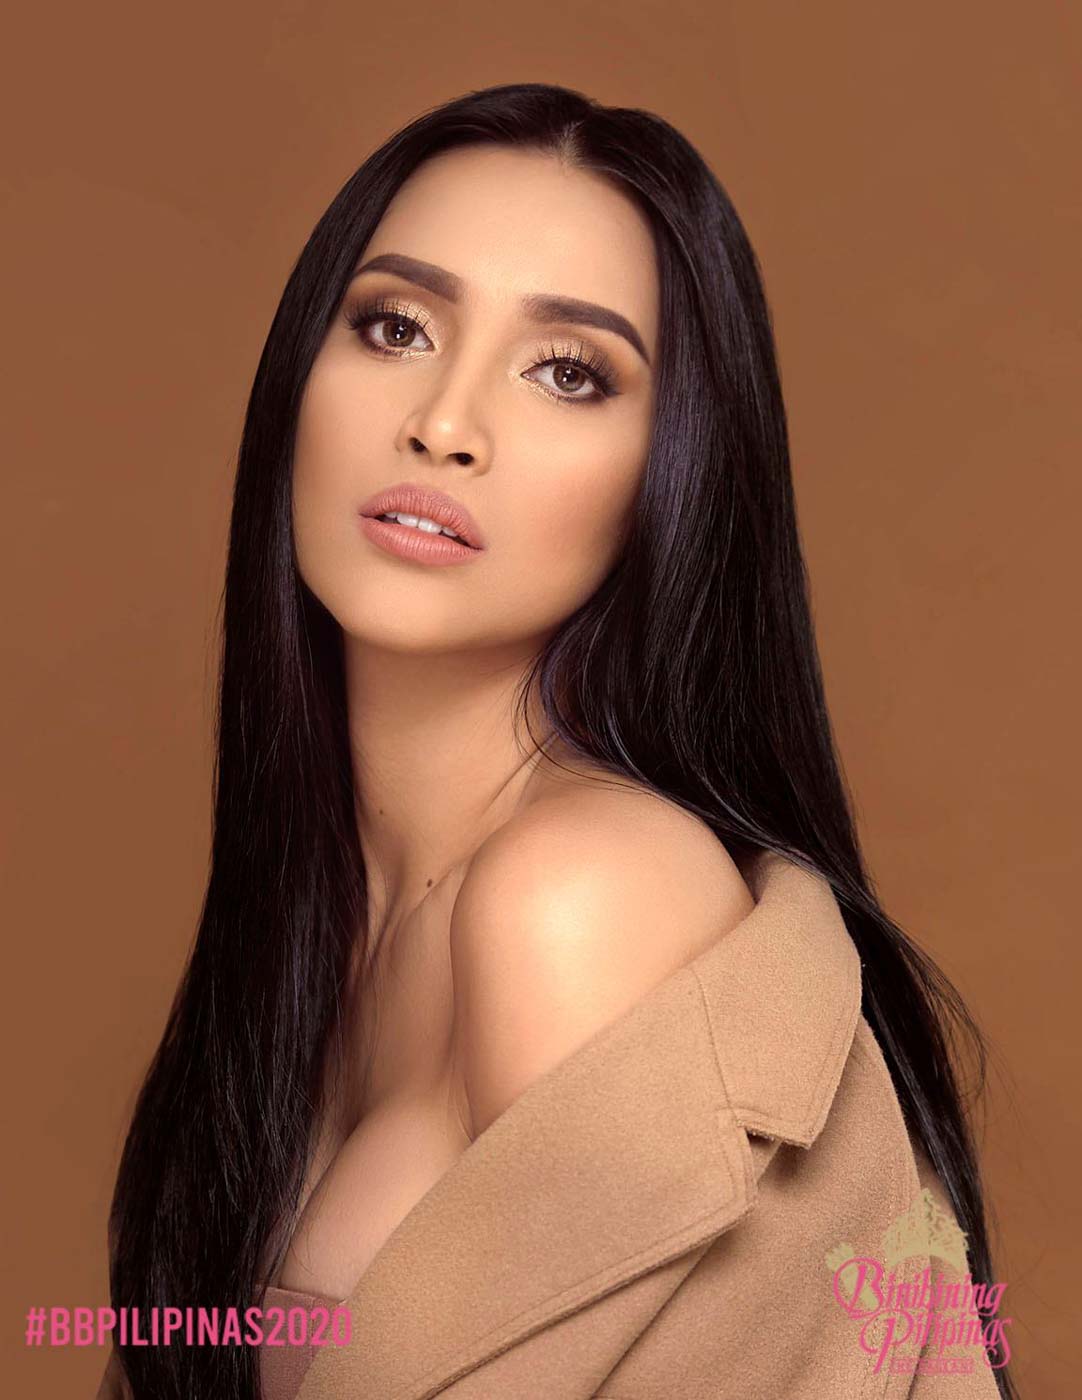 IN PHOTOS: Official portraits of Binibining Pilipinas 2020 candidates